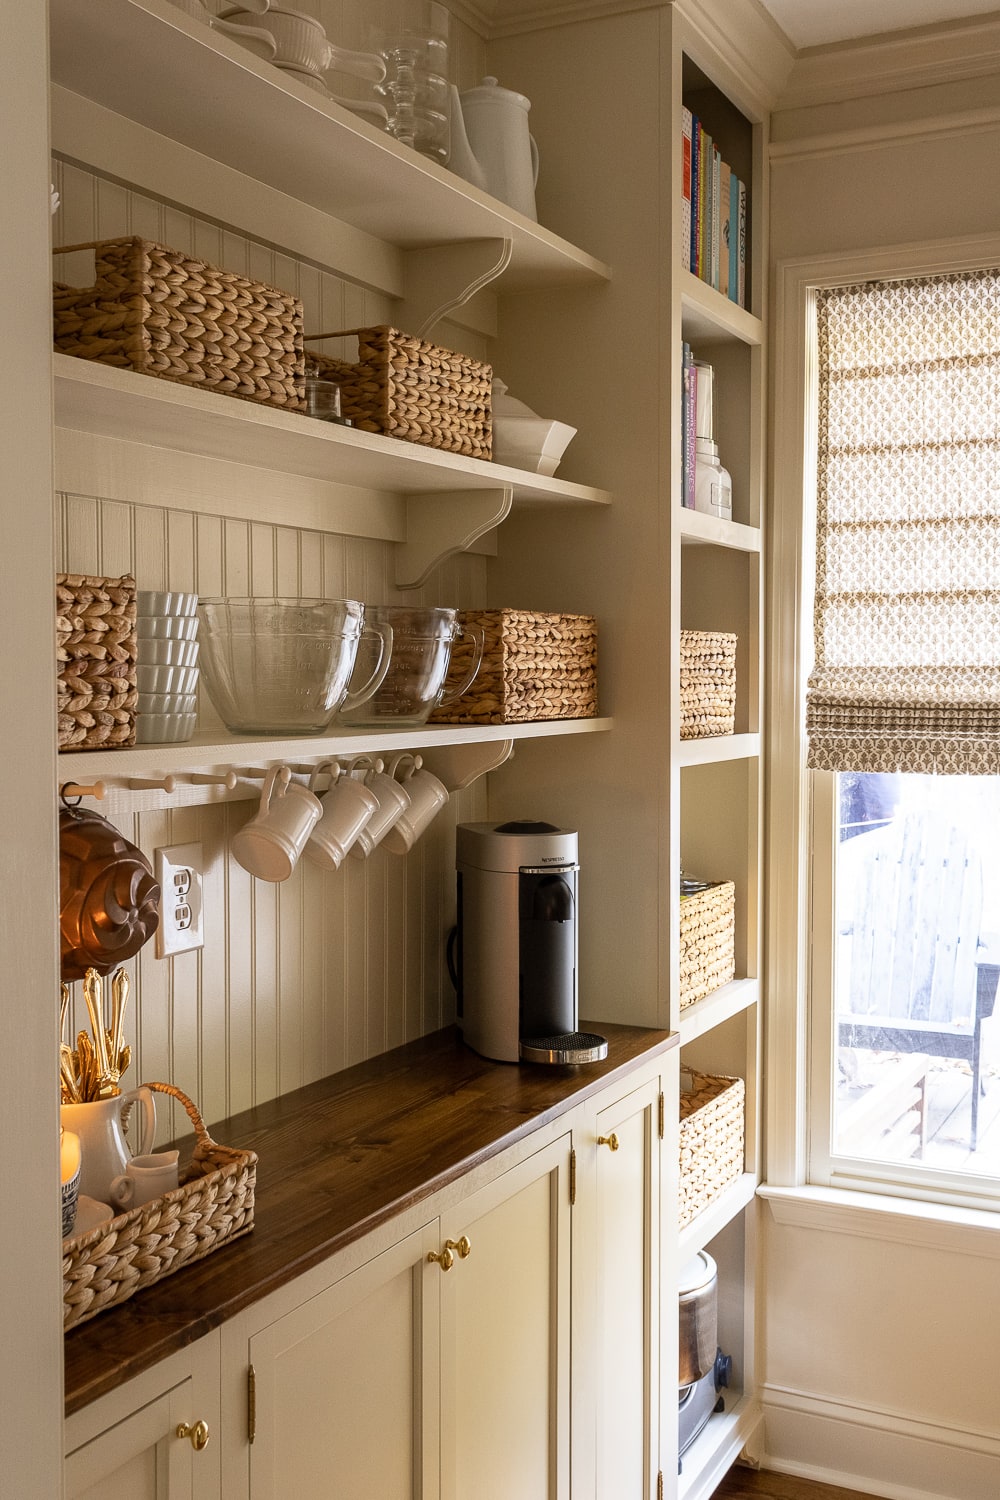 A DIY BUTLER'S PANTRY TO STORE SERVING DISHES FOR ENTERTAINING